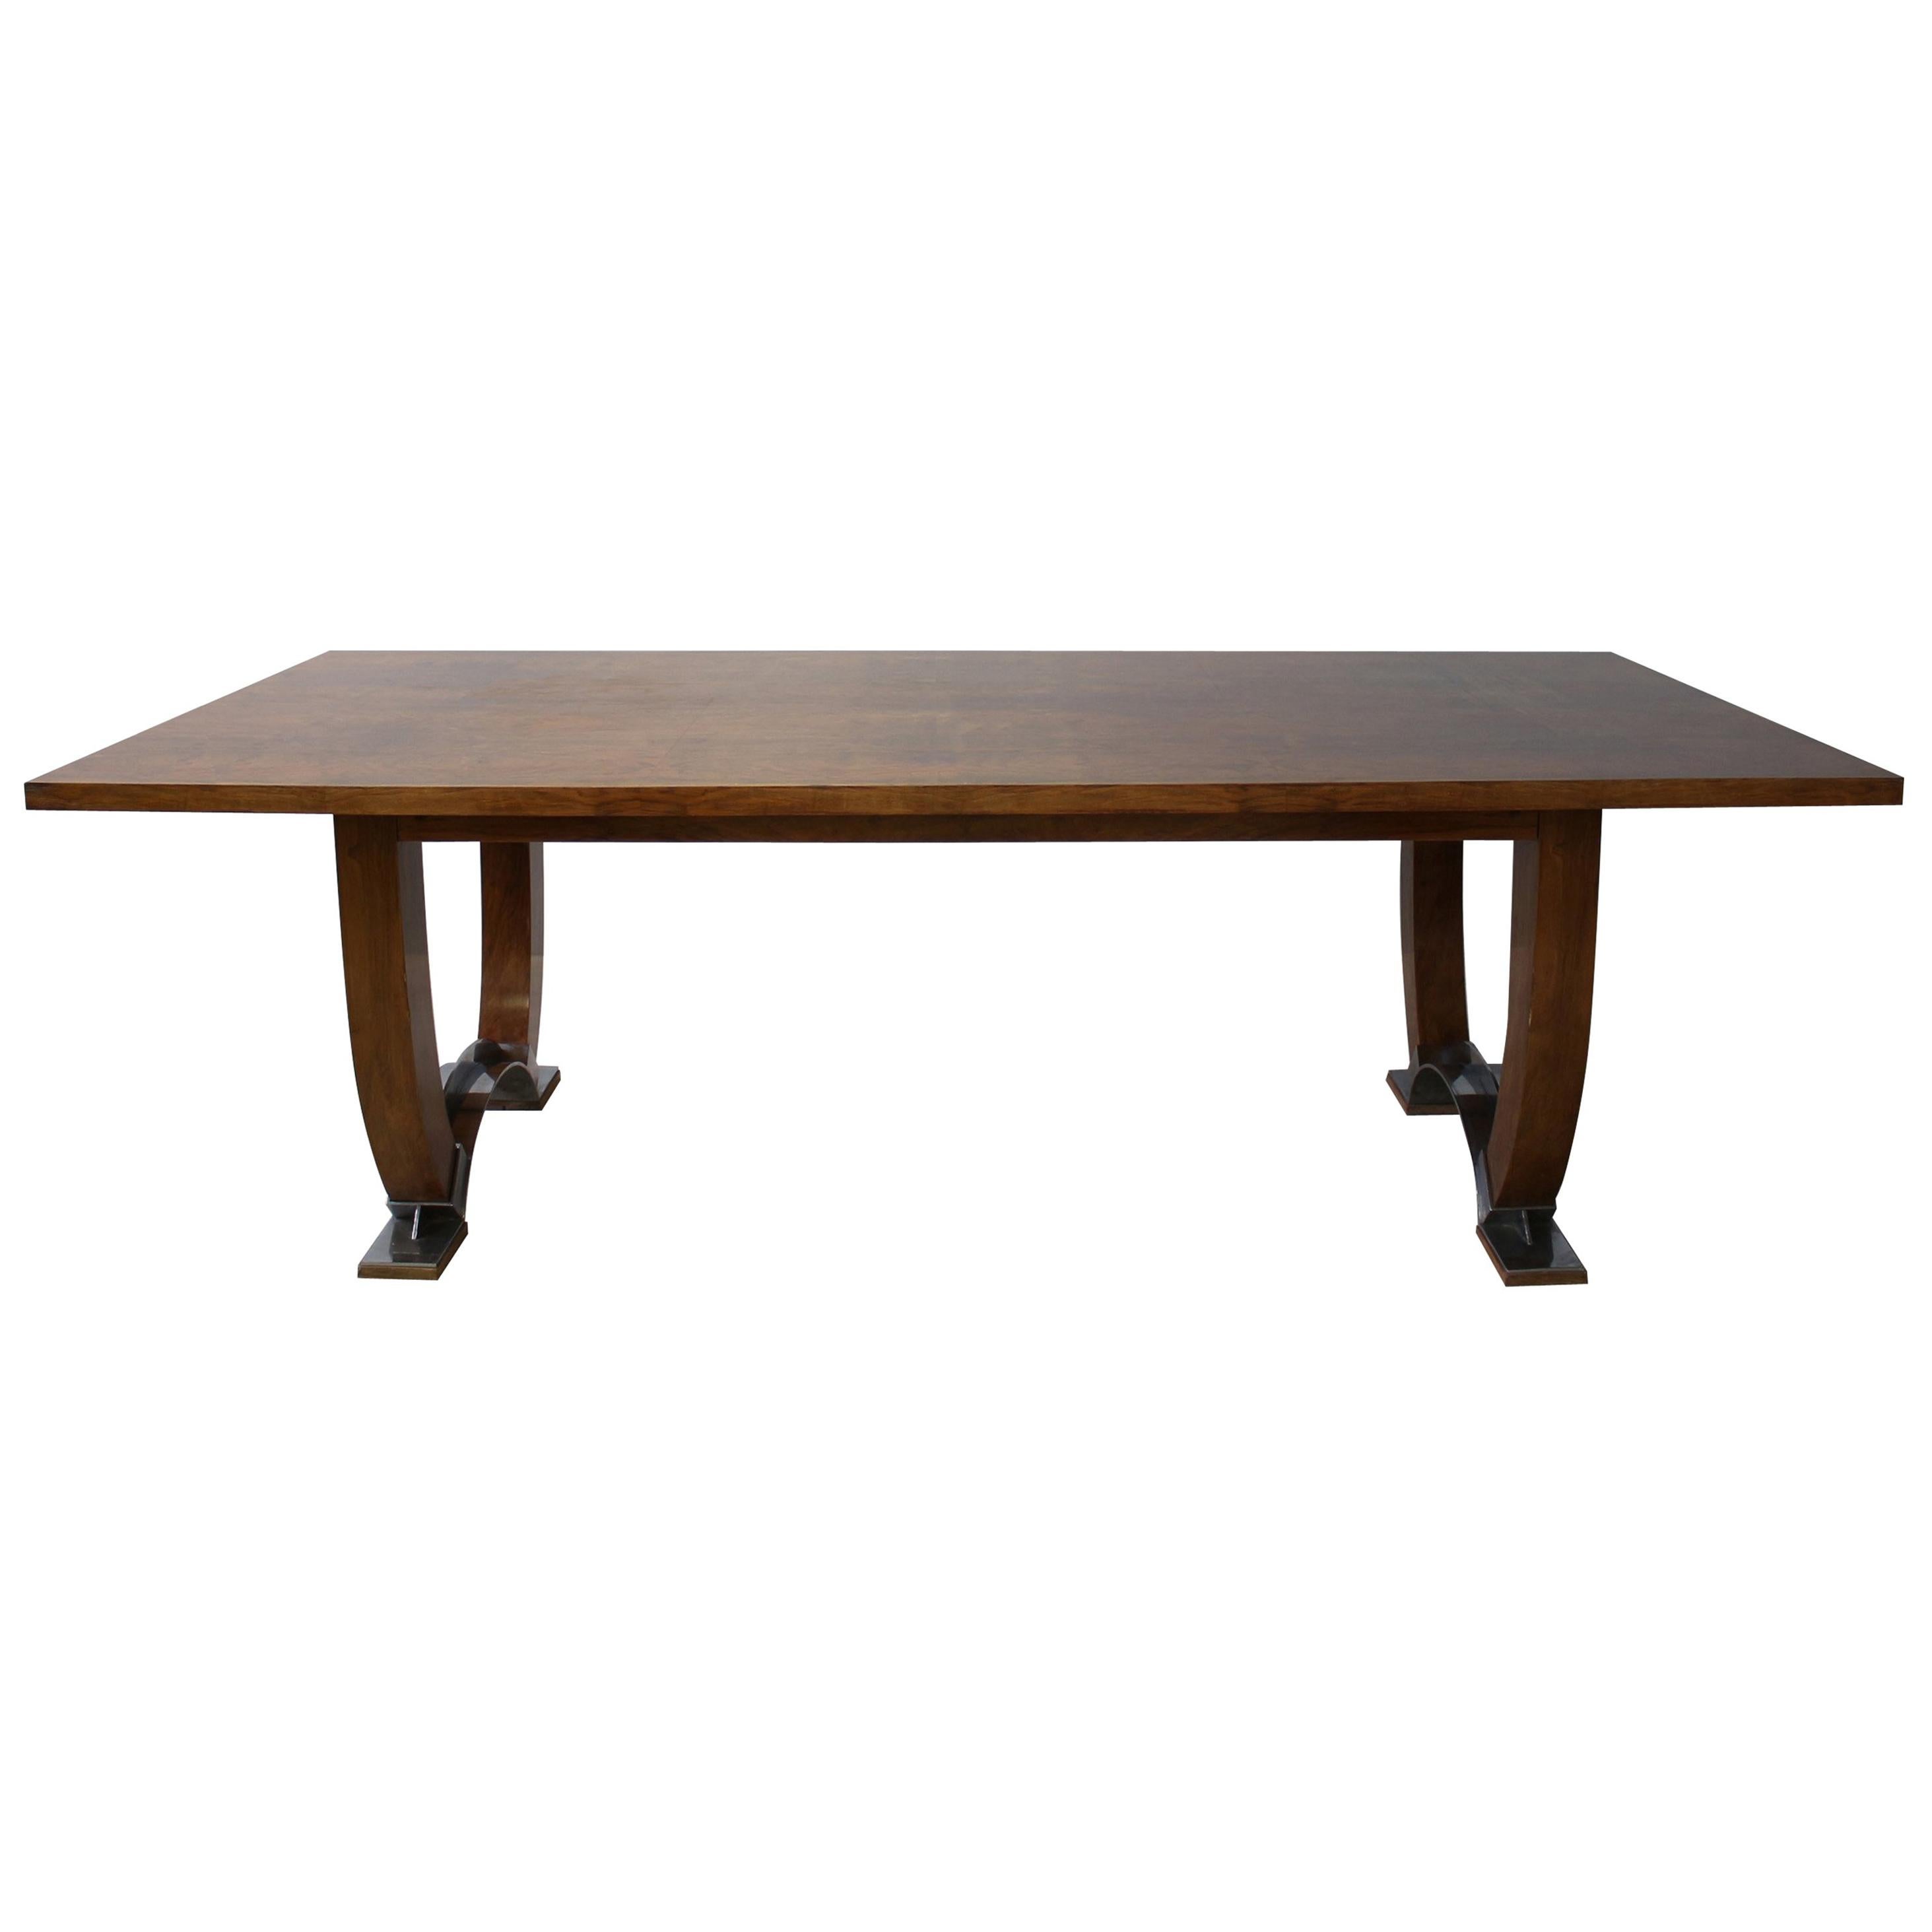 Large Fine French Art Deco Extendable Walnut Dining Table by Leleu - Documented